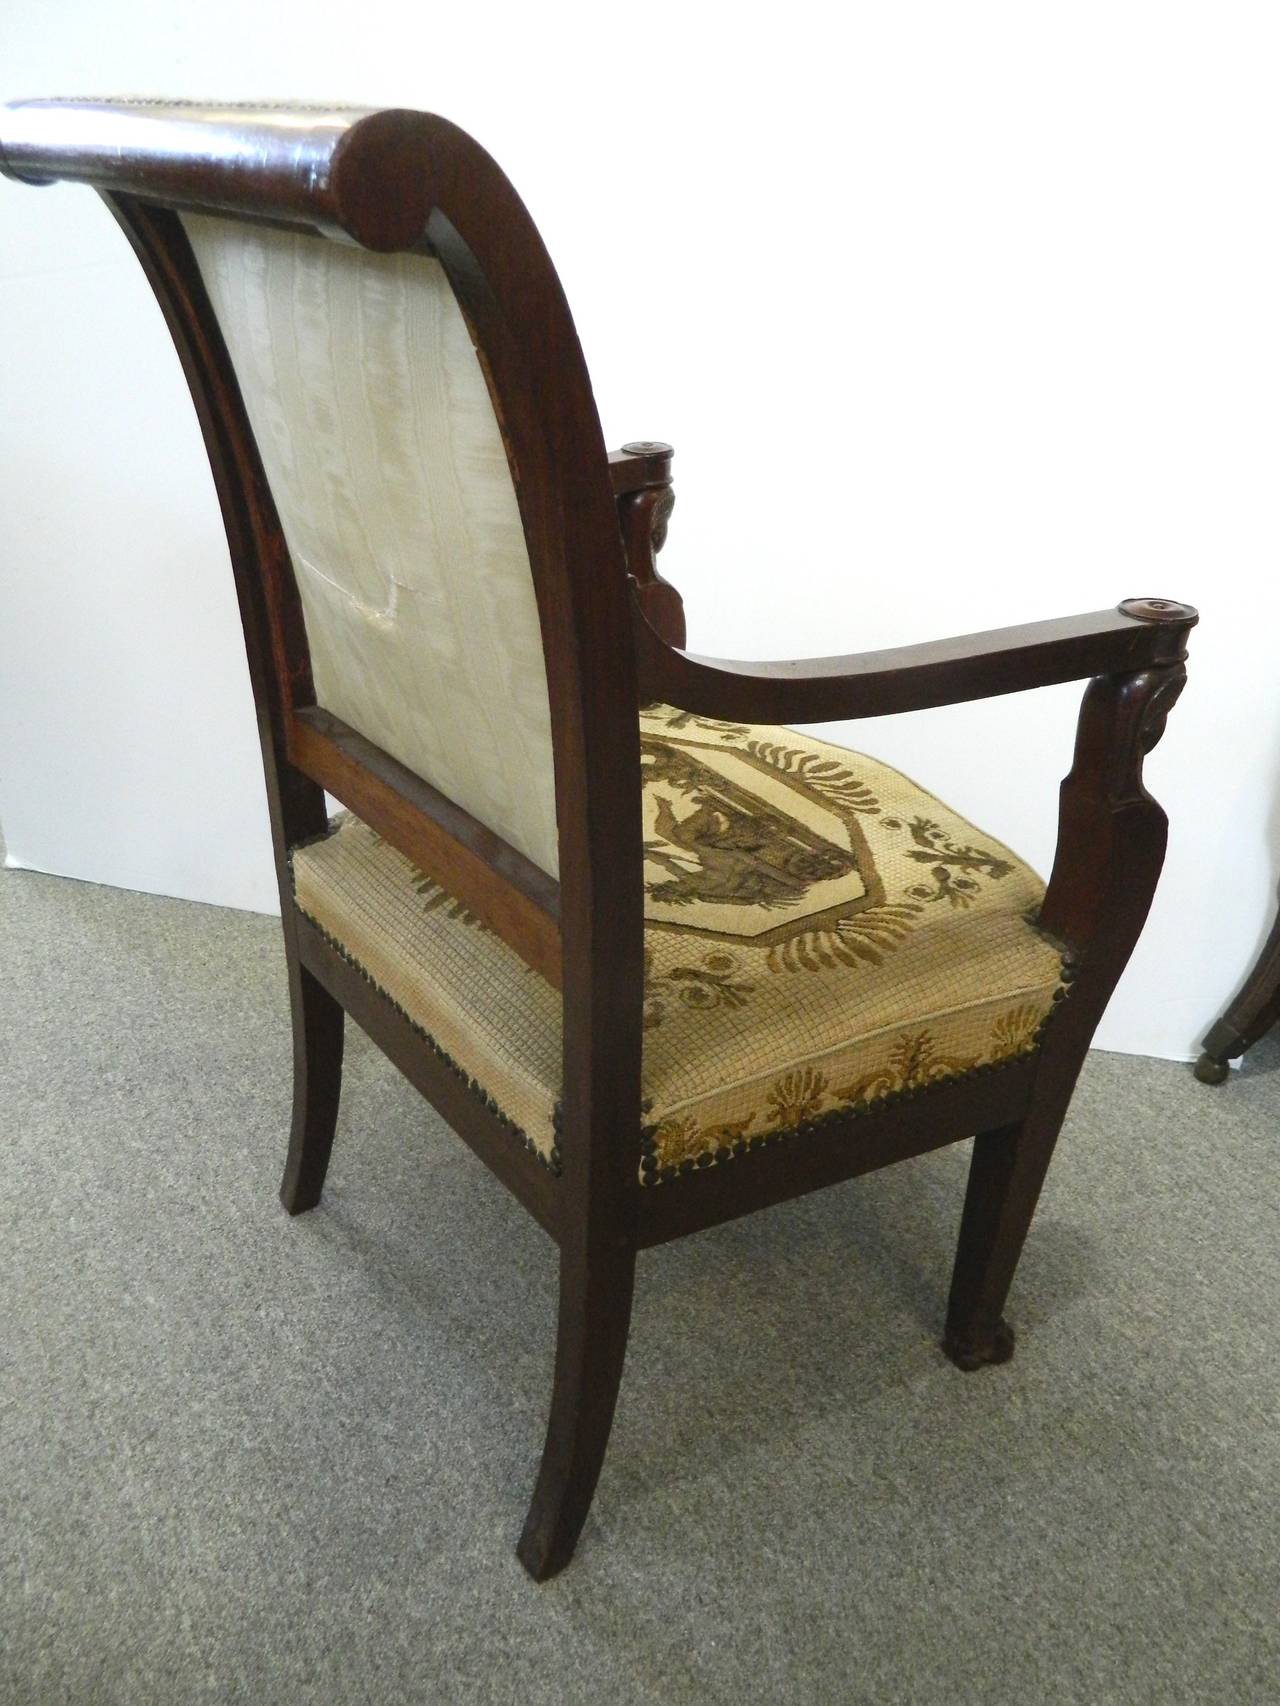 Pair of Greek Revival Armchairs, Early 19th Century For Sale 3